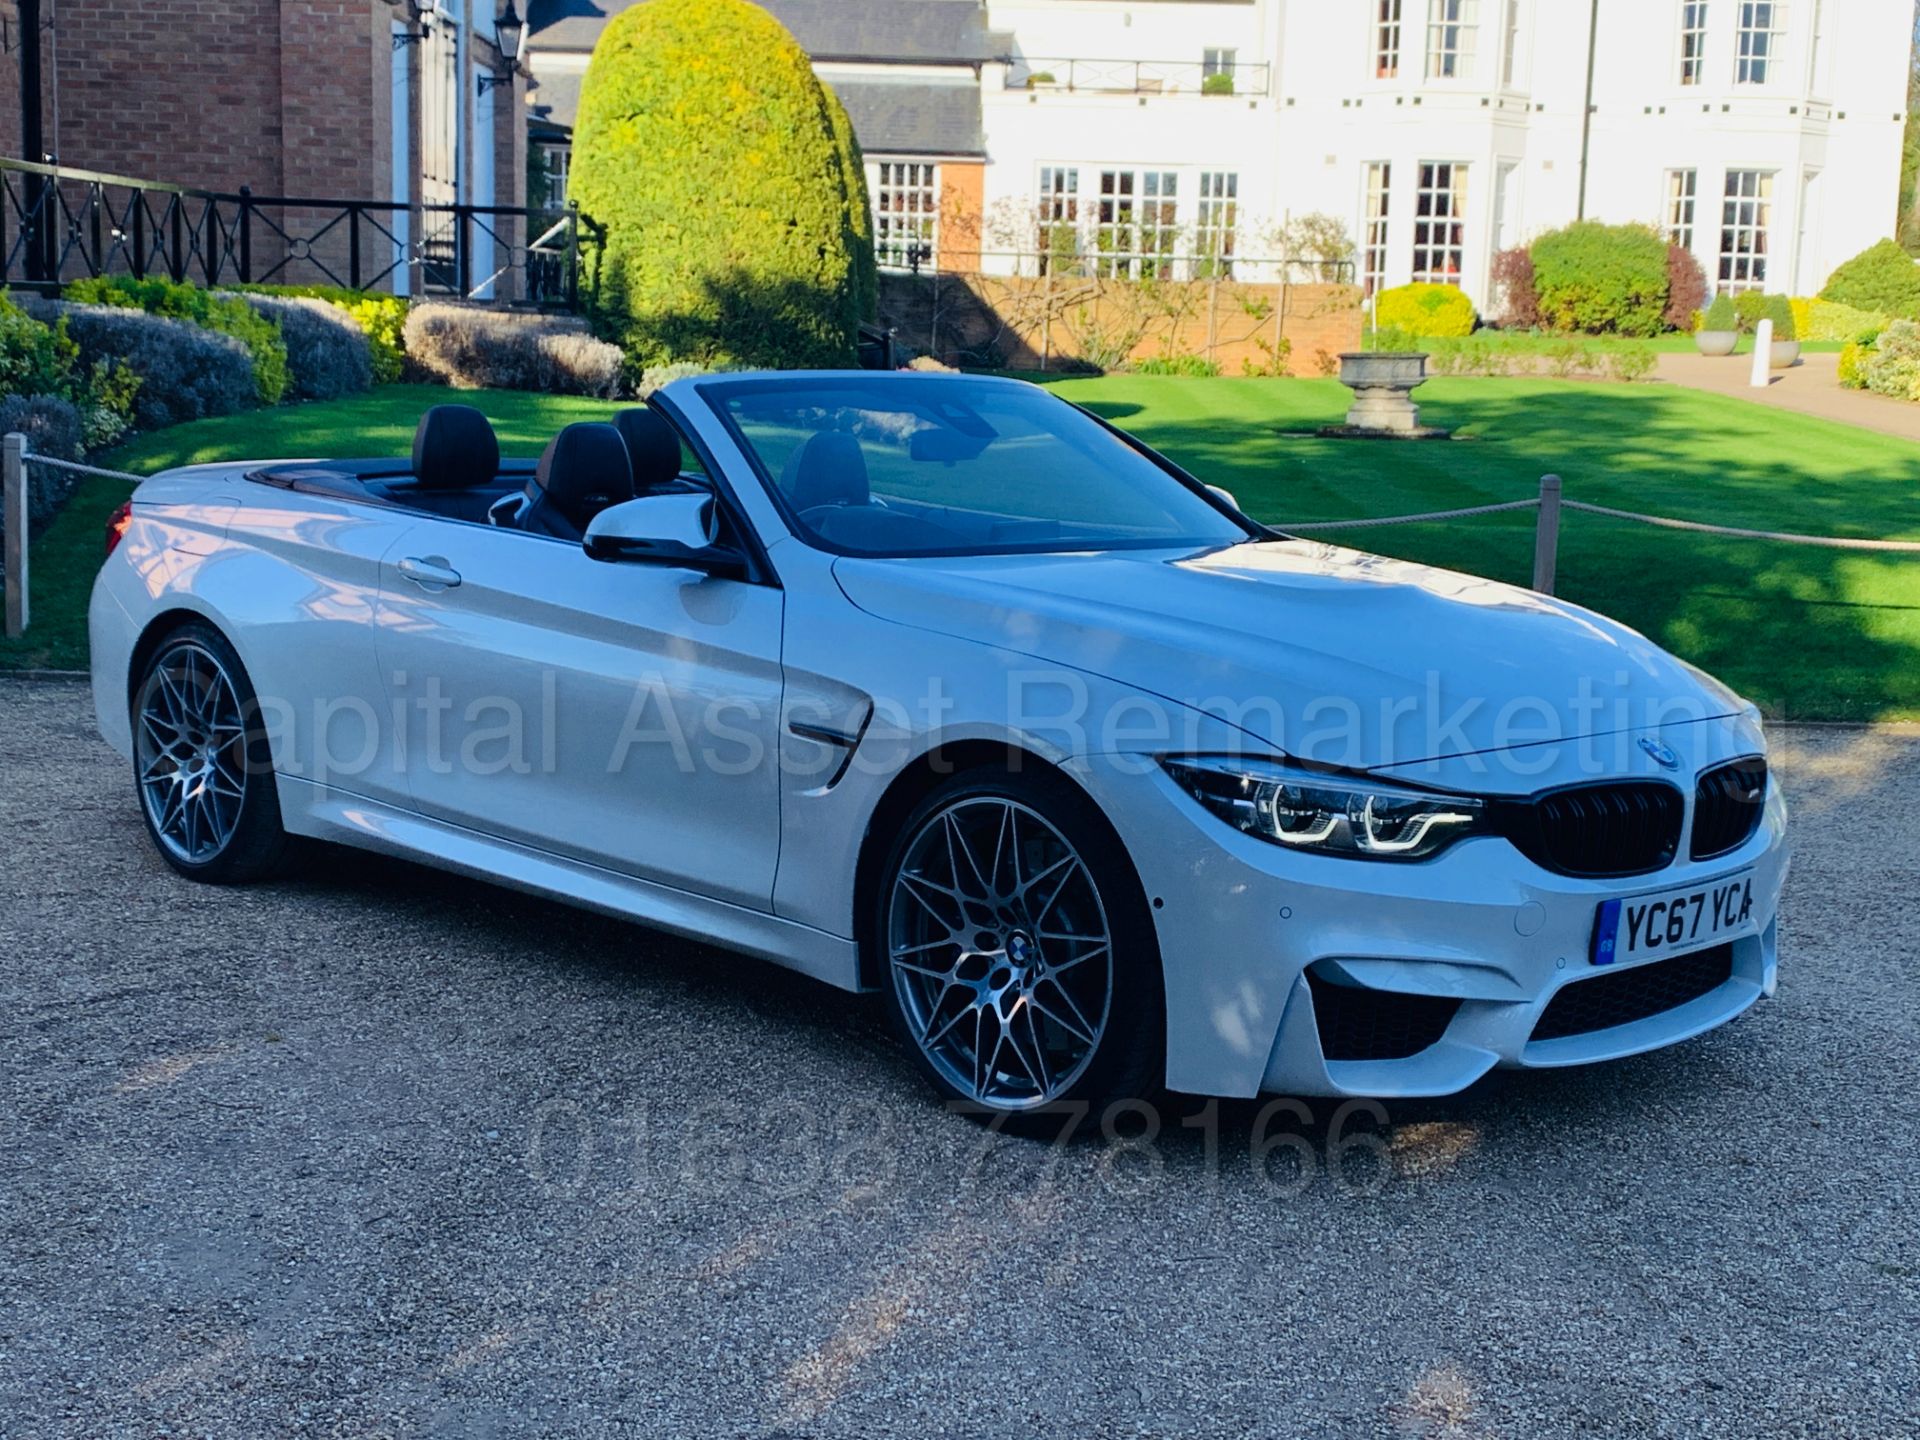 ON SALE BMW M4 CONVERTIBLE *COMPETITION PACKAGE* (2018 MODEL) '431 BHP - M DCT AUTO' WOW!!!!! - Image 19 of 89